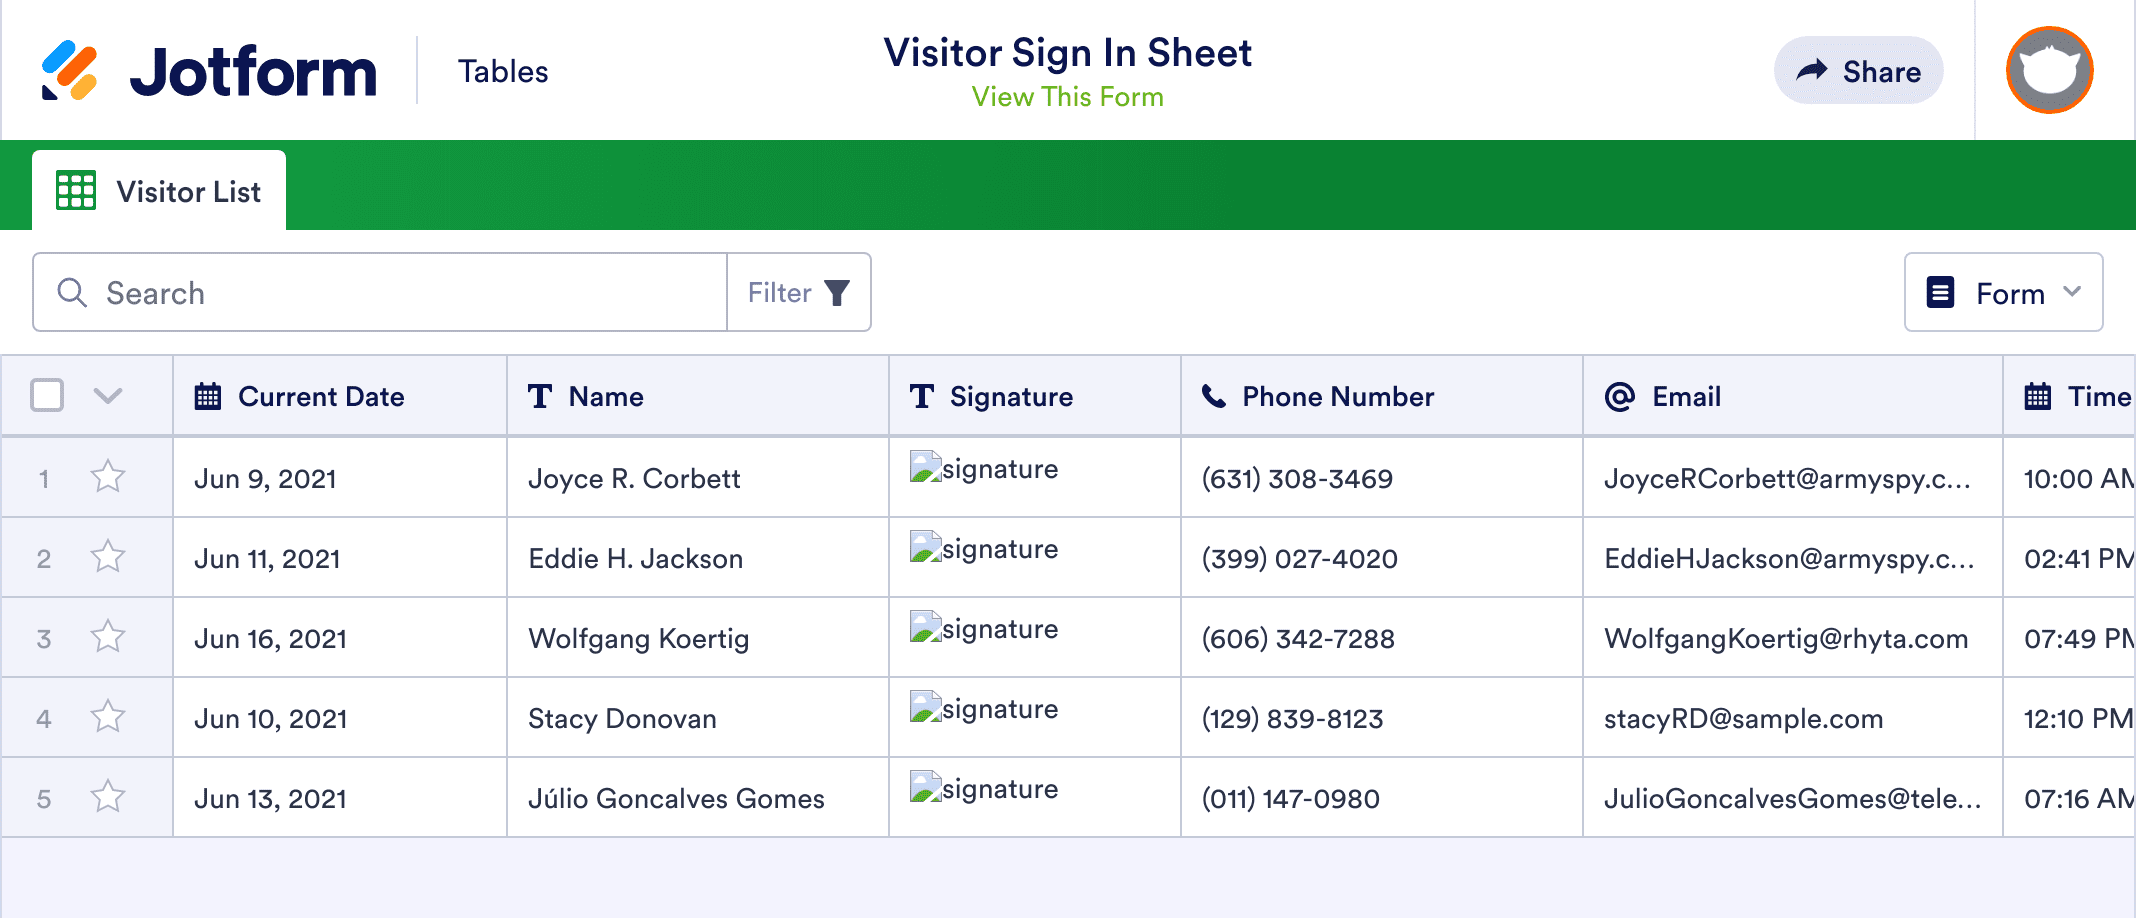 Visitor Sign In Sheet